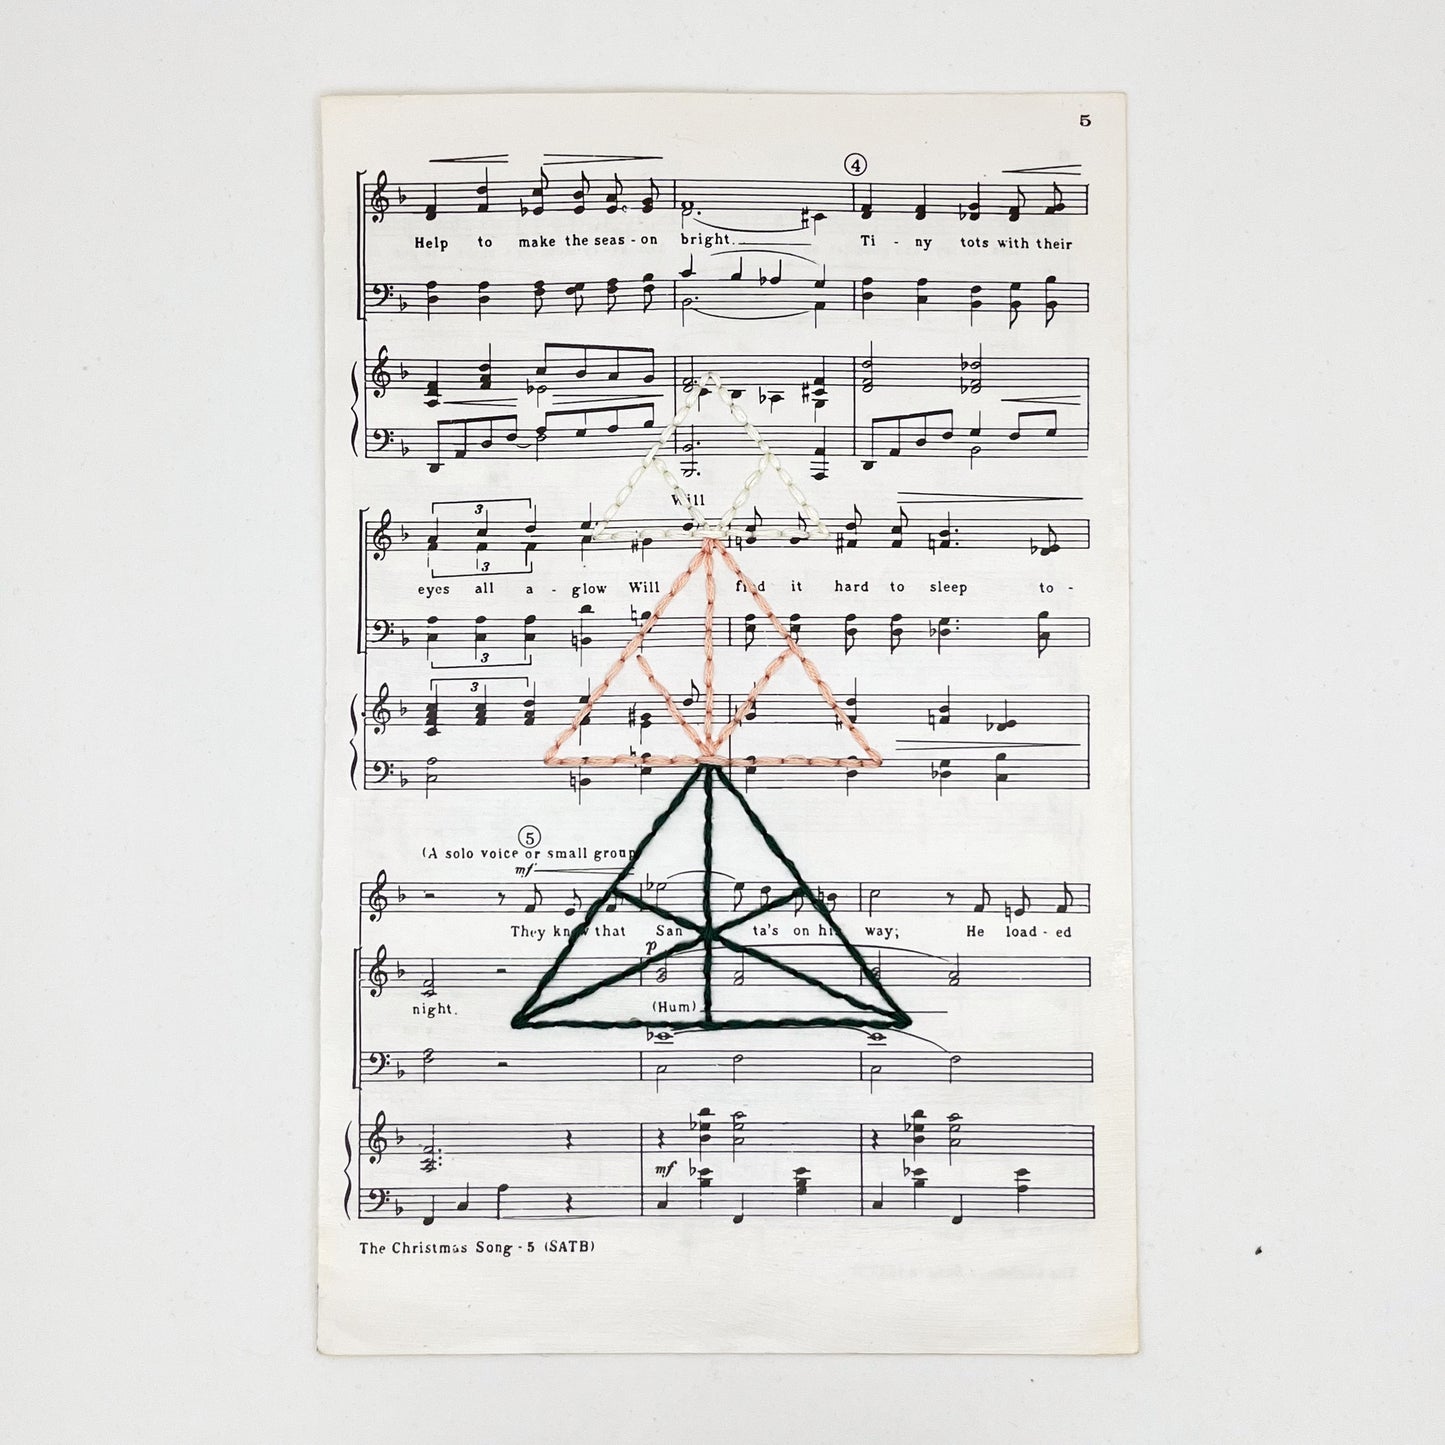 sheet music from "The Christmas Song", hand stitched over with a Christmas tree made from triangles, in green, peach and ivory thread